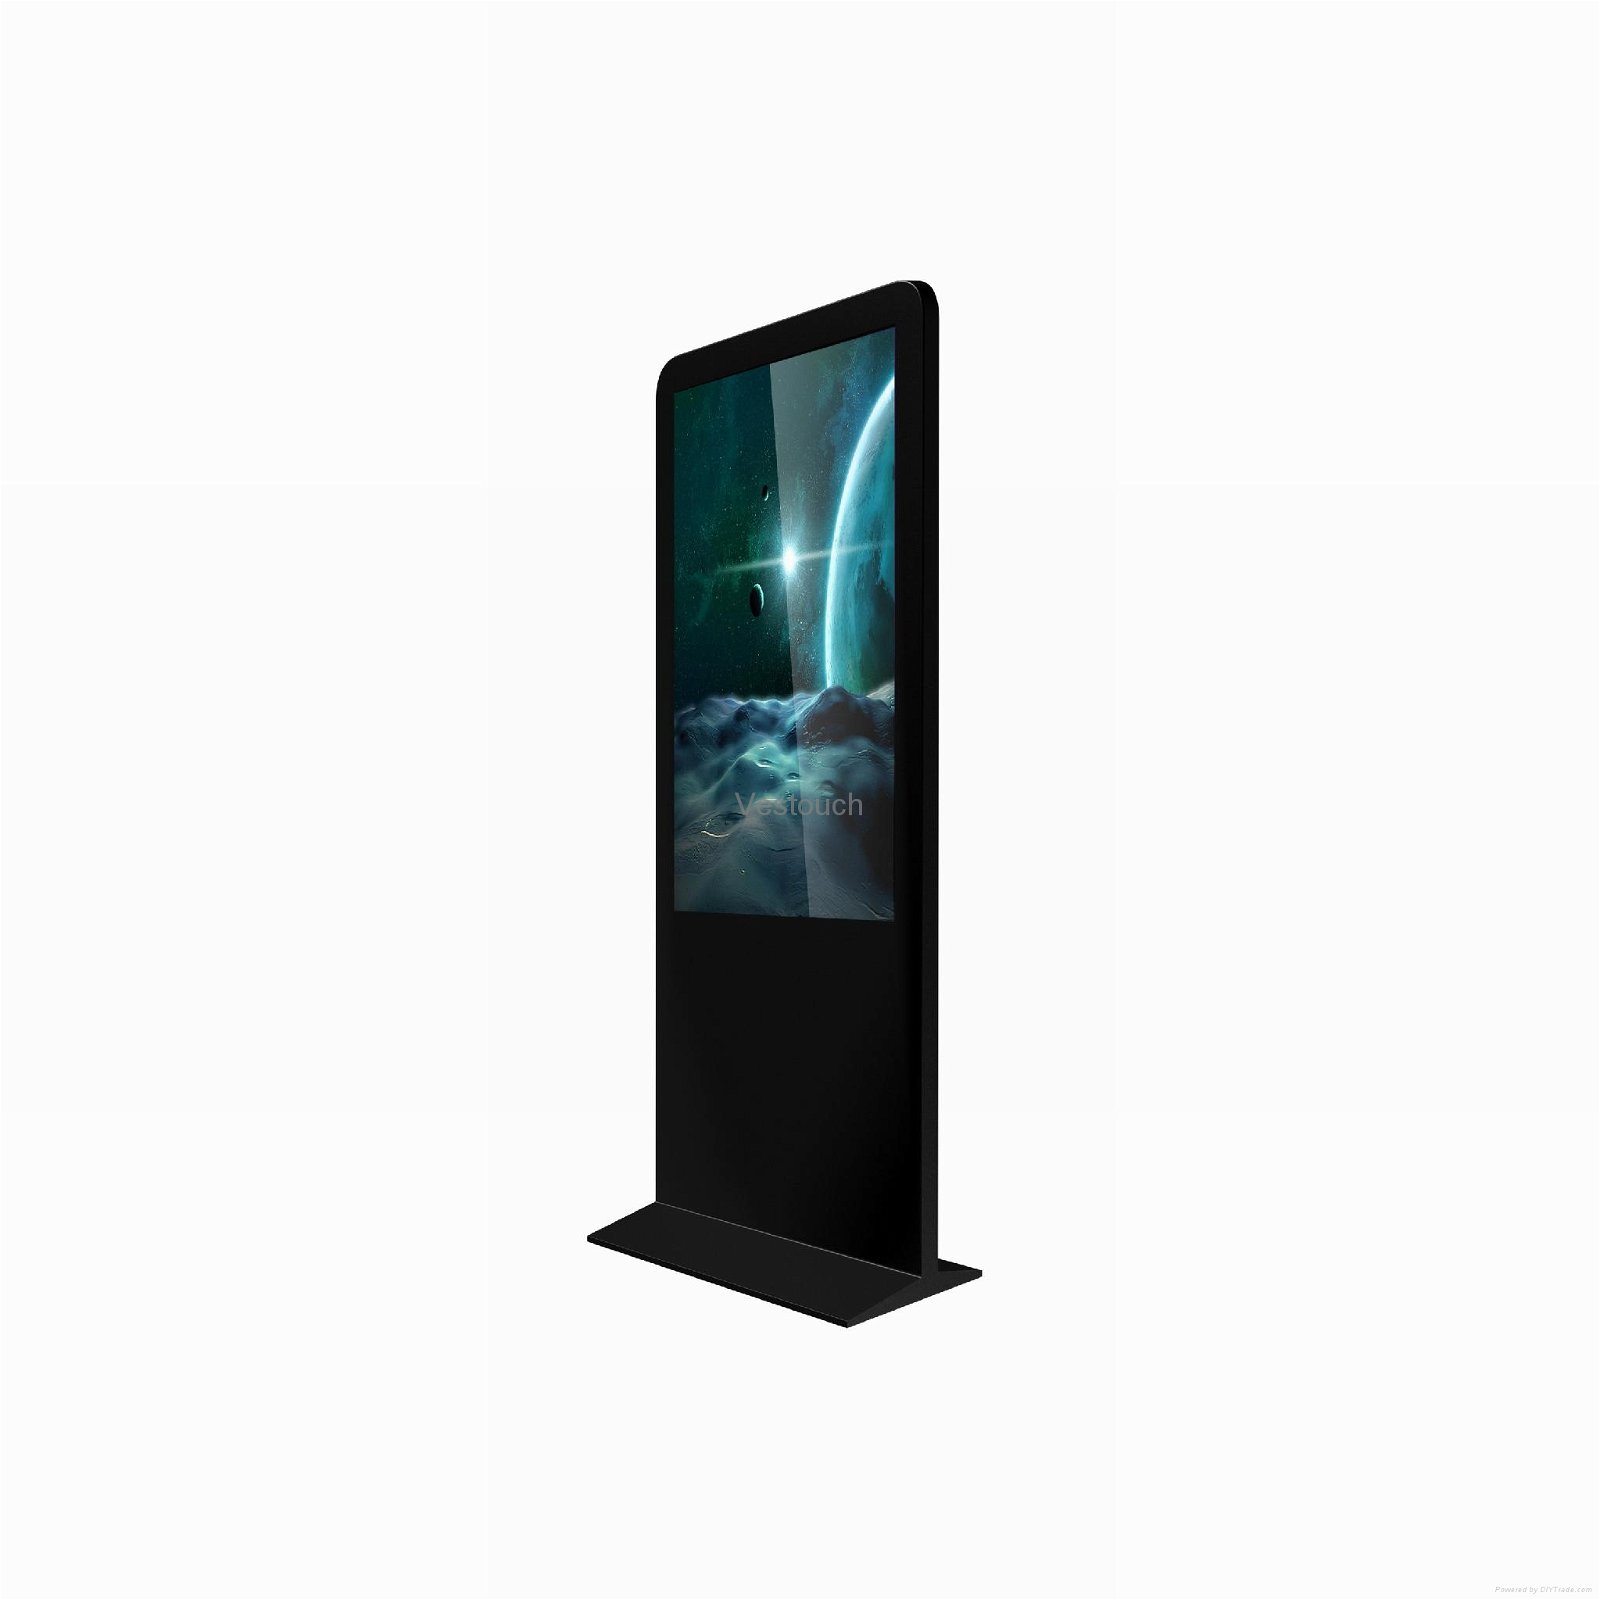 43-55inch Floor Standing IR Touch Monitor